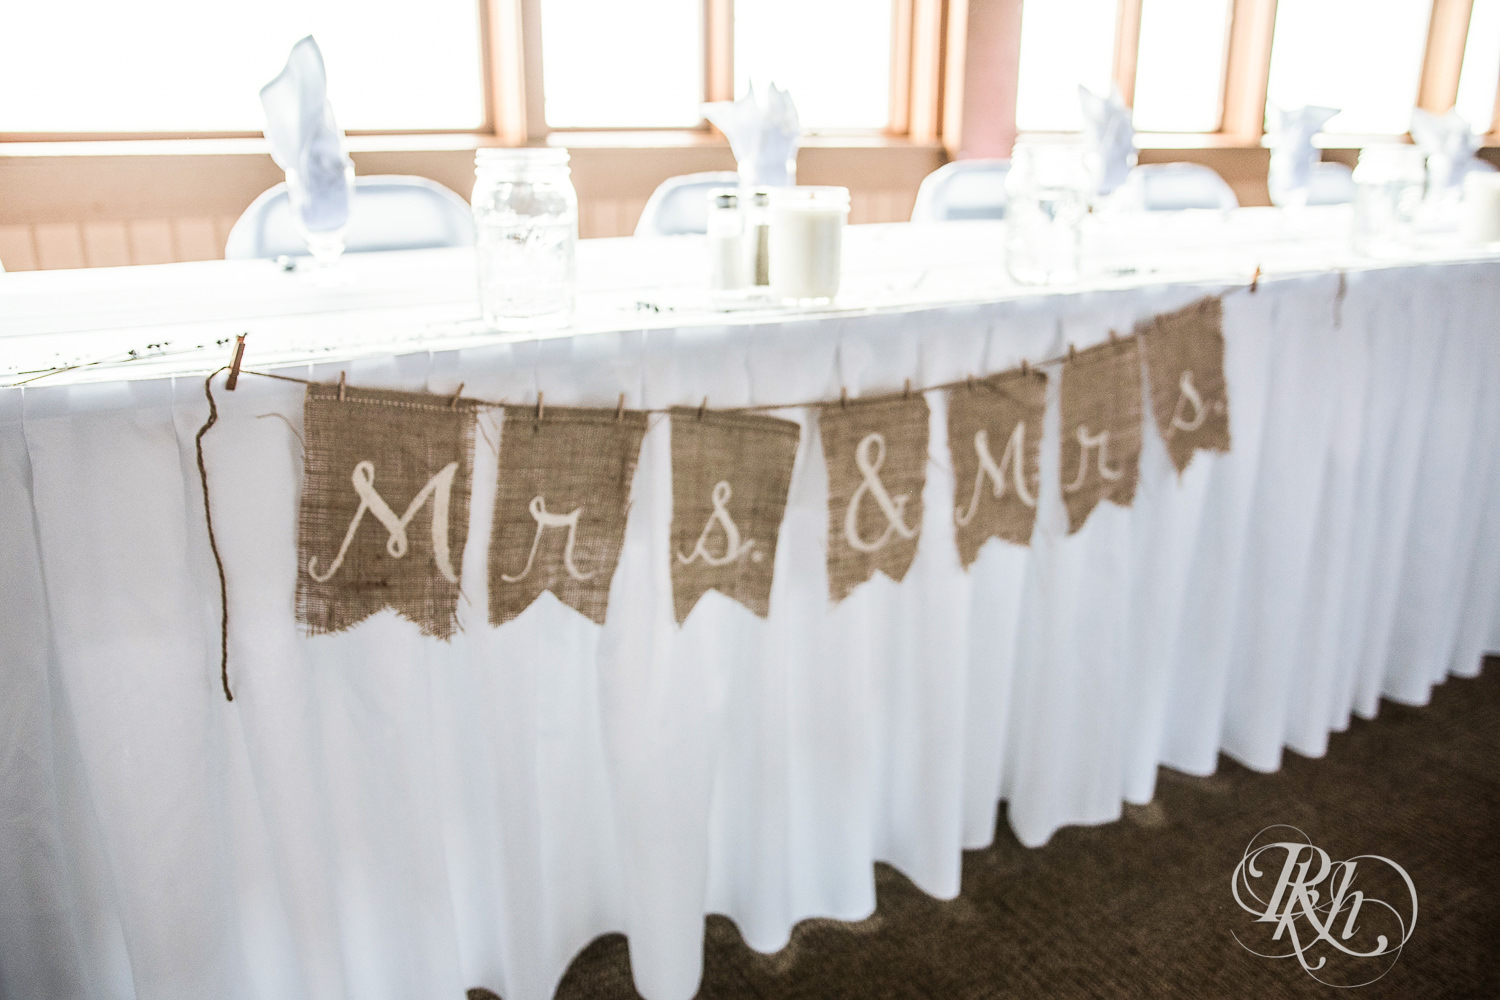 Mrs and Mrs sign at a head table.